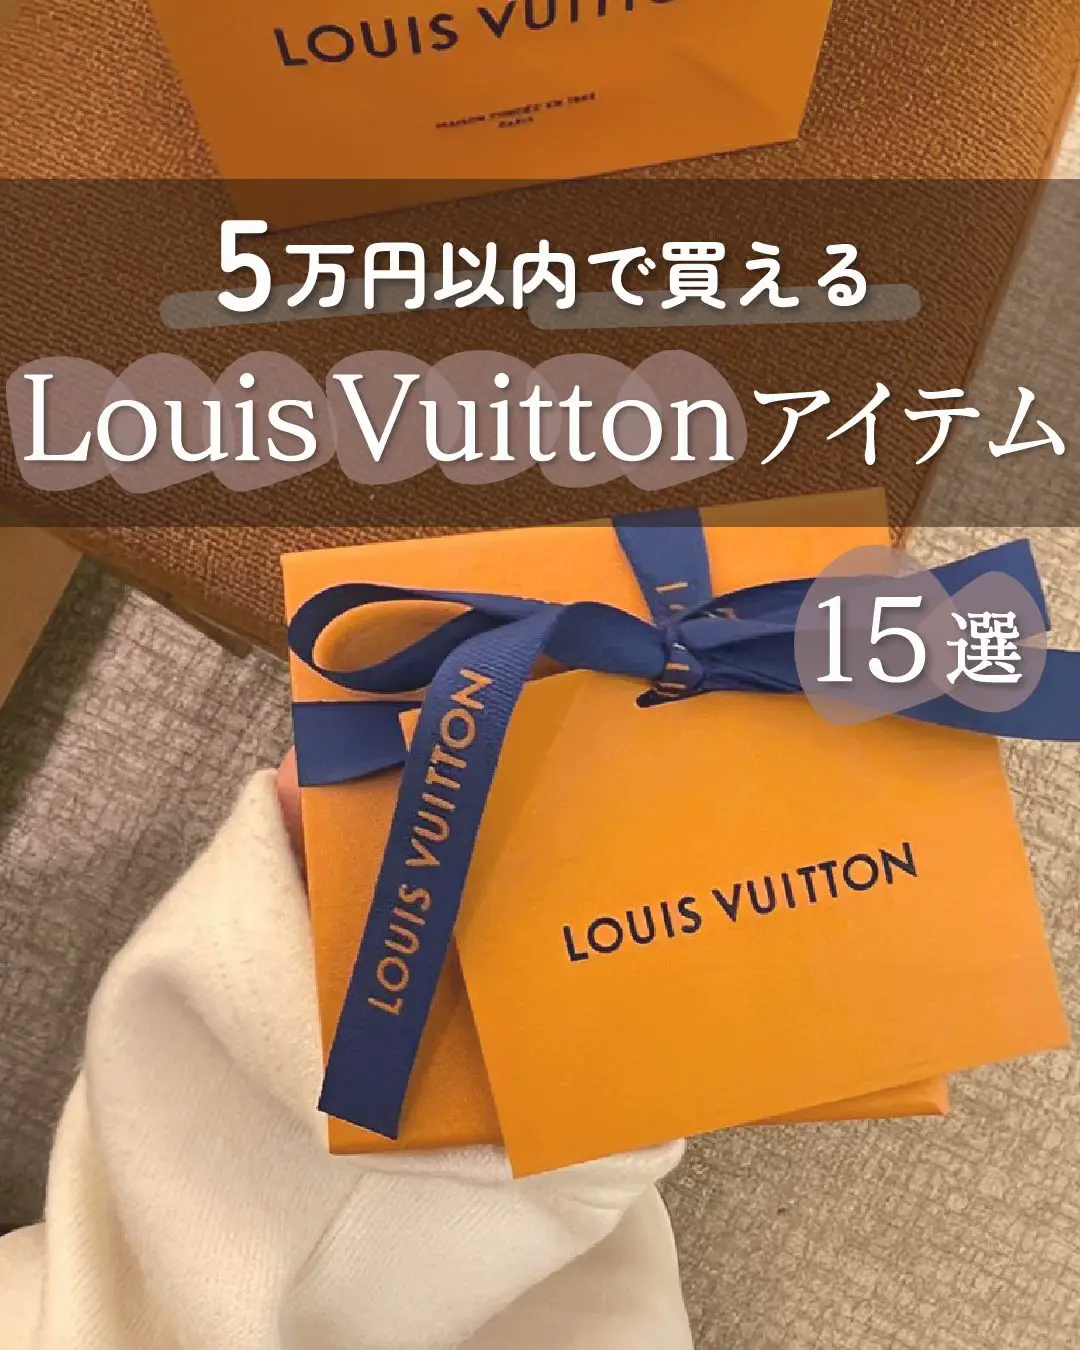 You can buy the brand Louis Vuitton with a budget of 50,000 yen